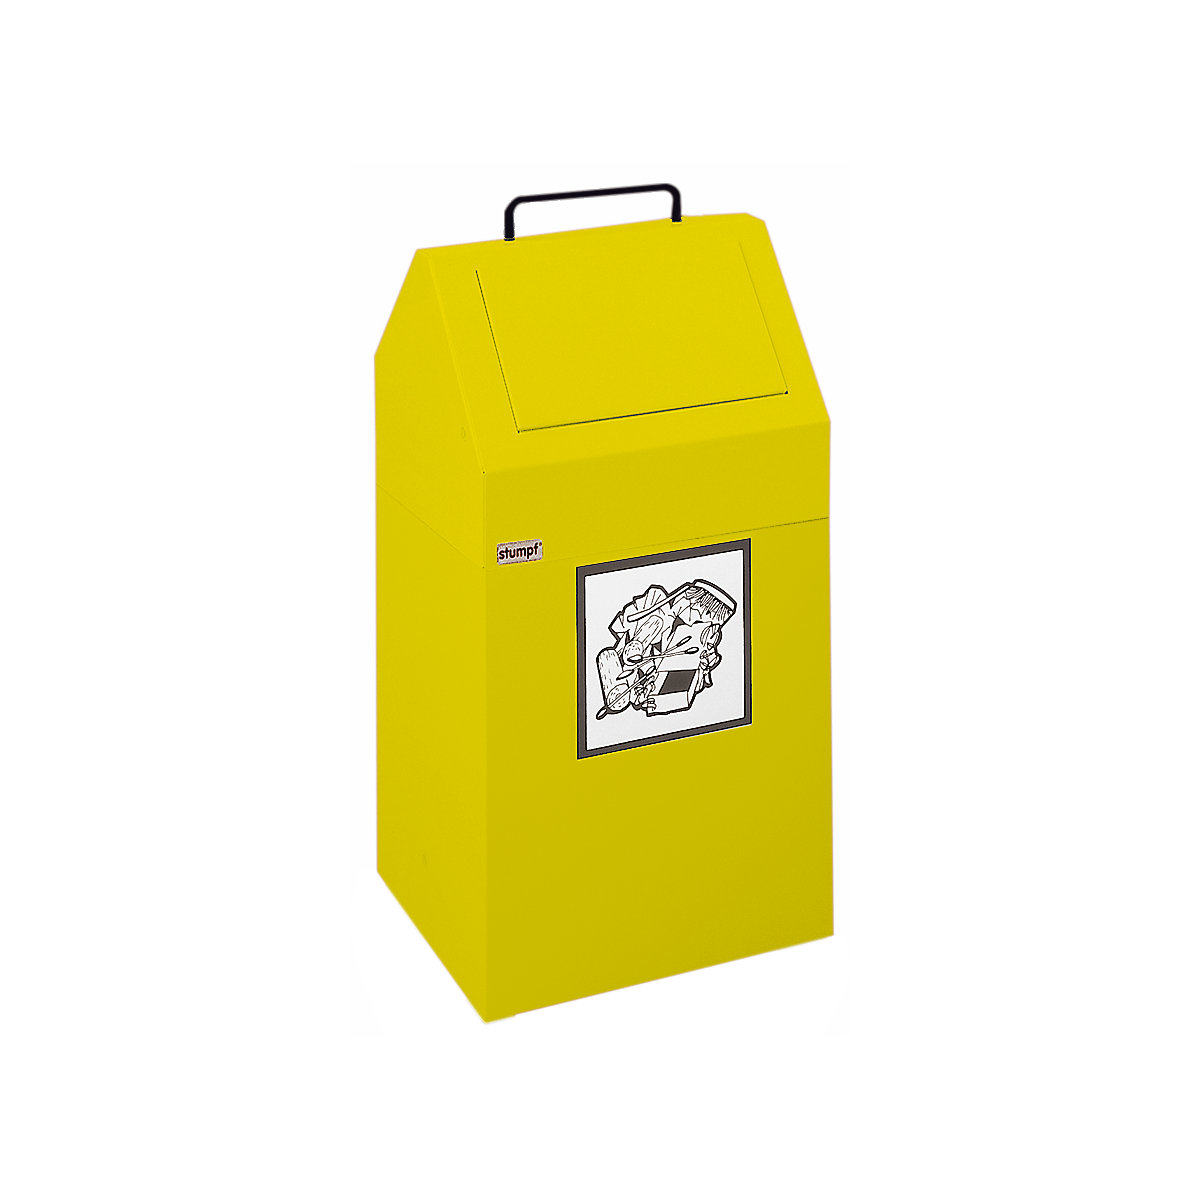 Recyclable waste collector with flap